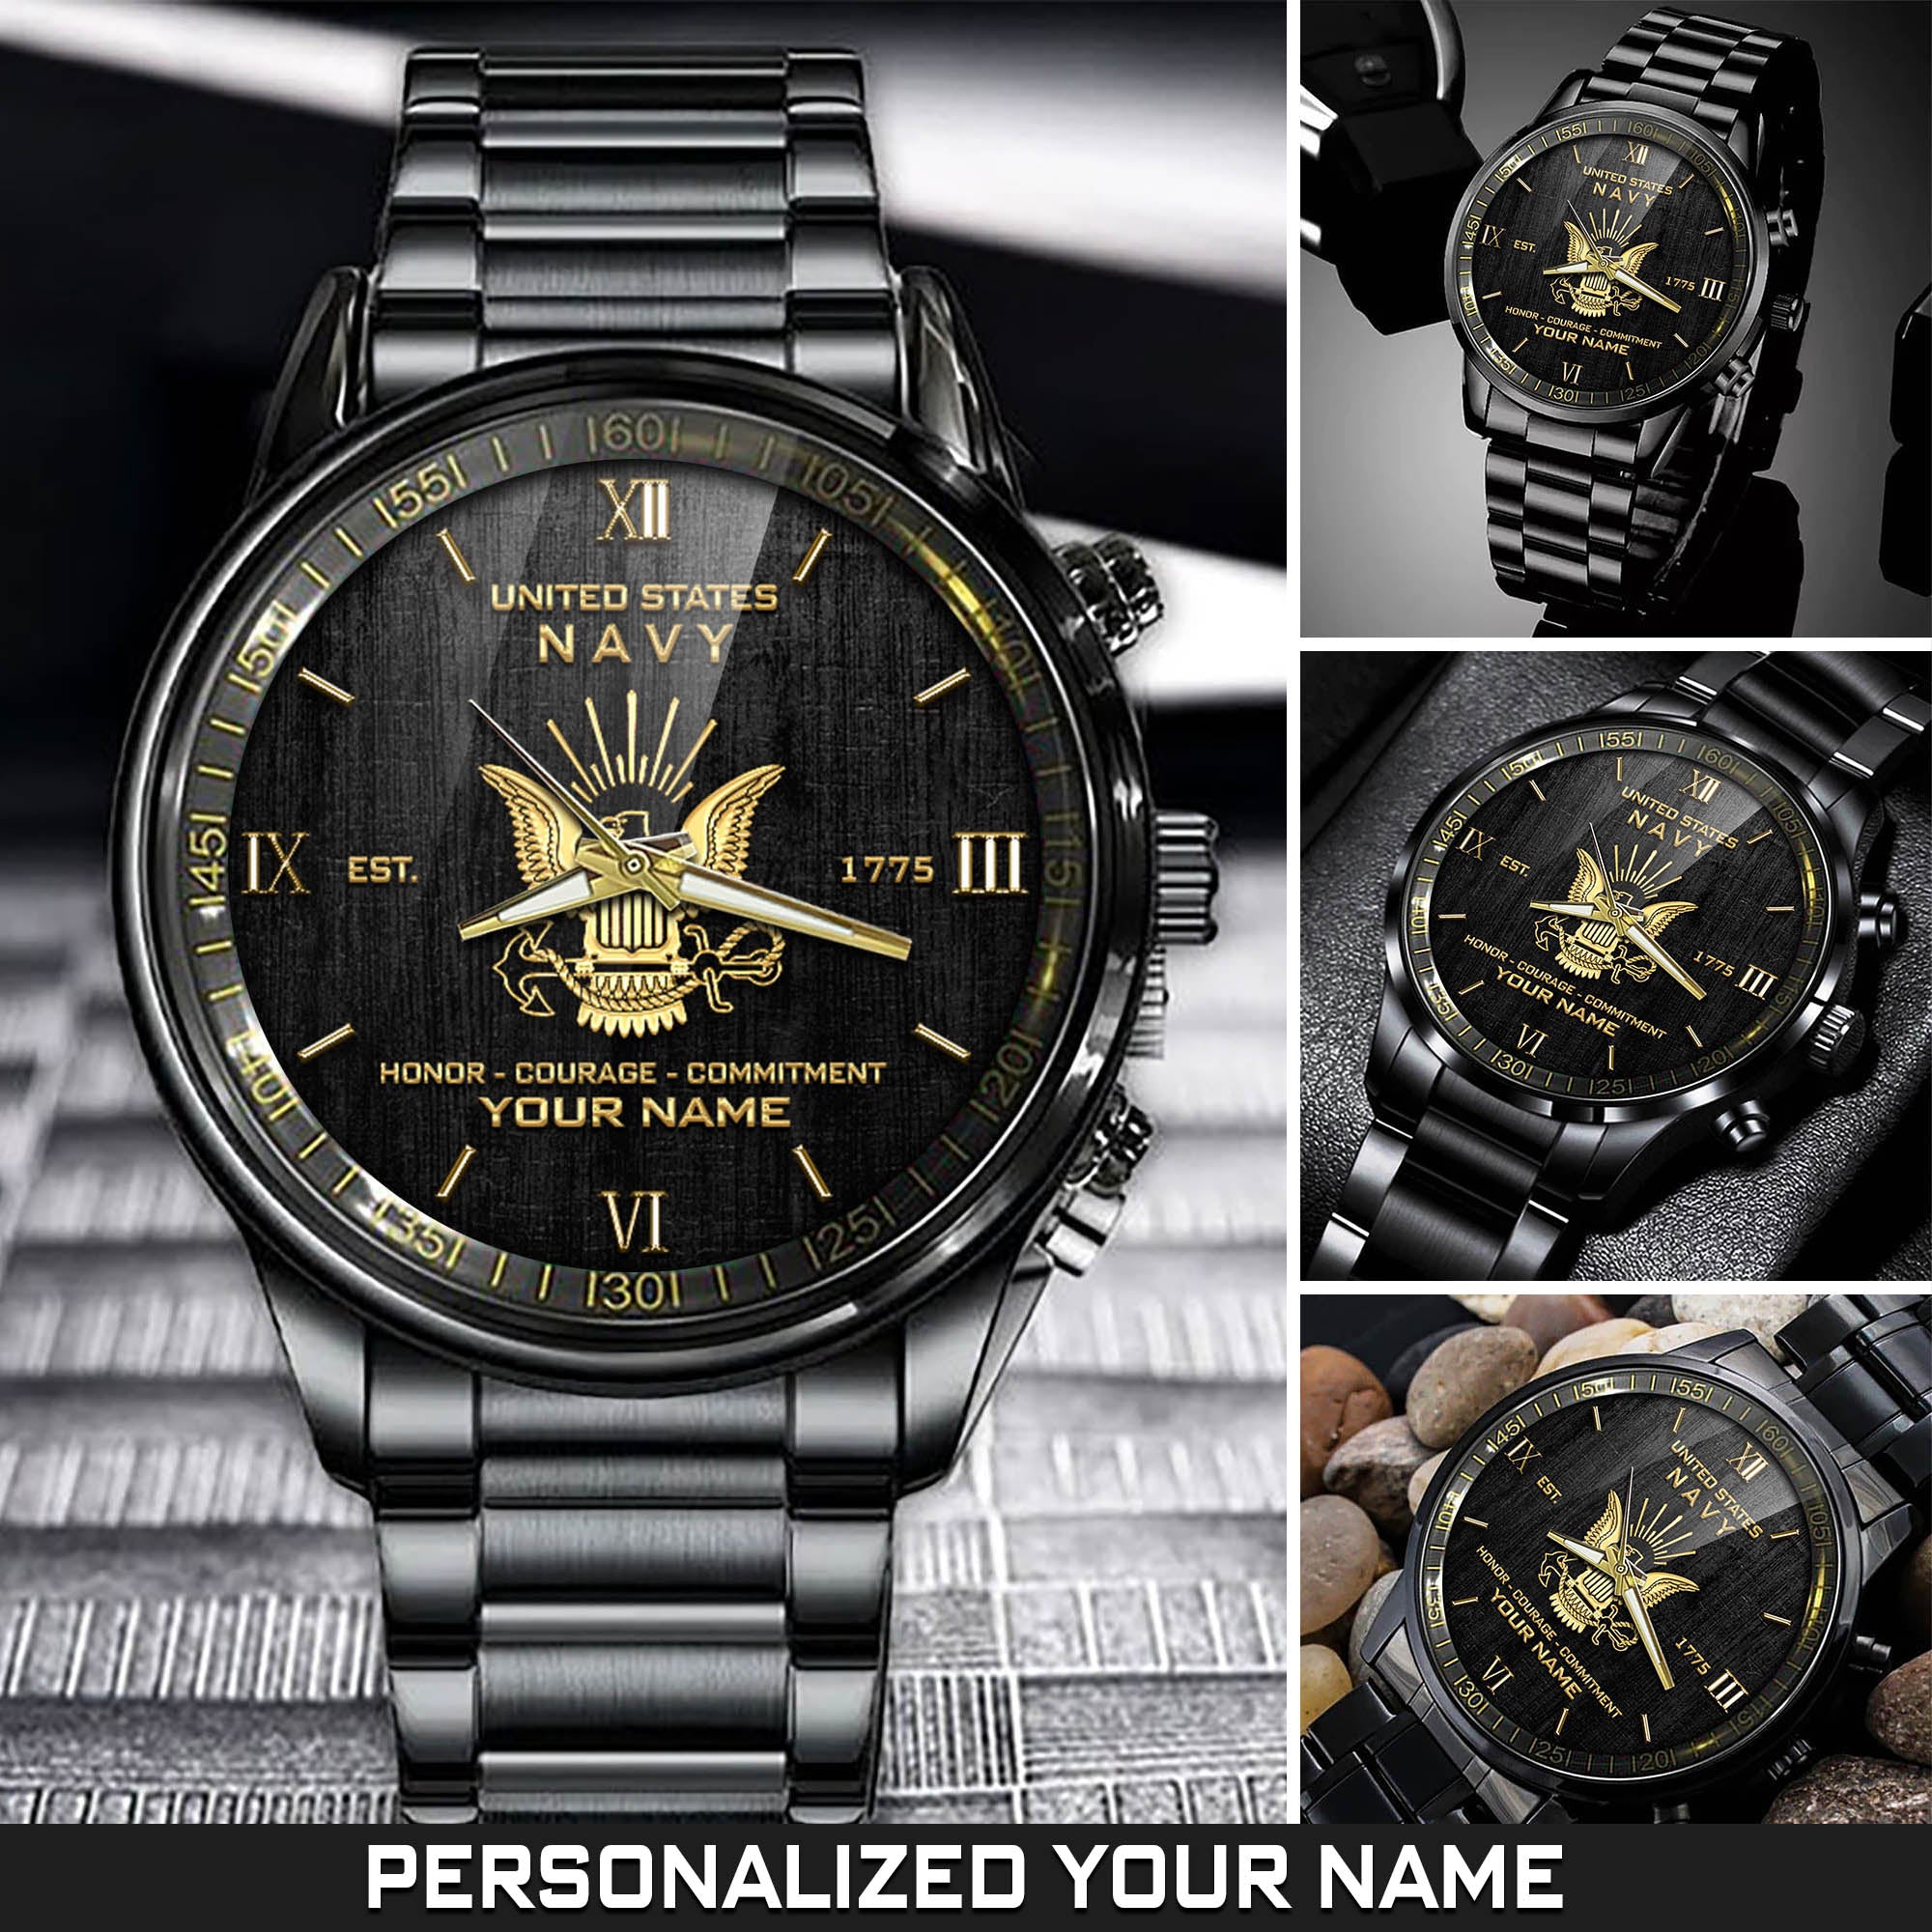 U.S. Navy Black Watch Honor Courage Commitment Navy Military Fashion Watch Personalized Gift for Soldier